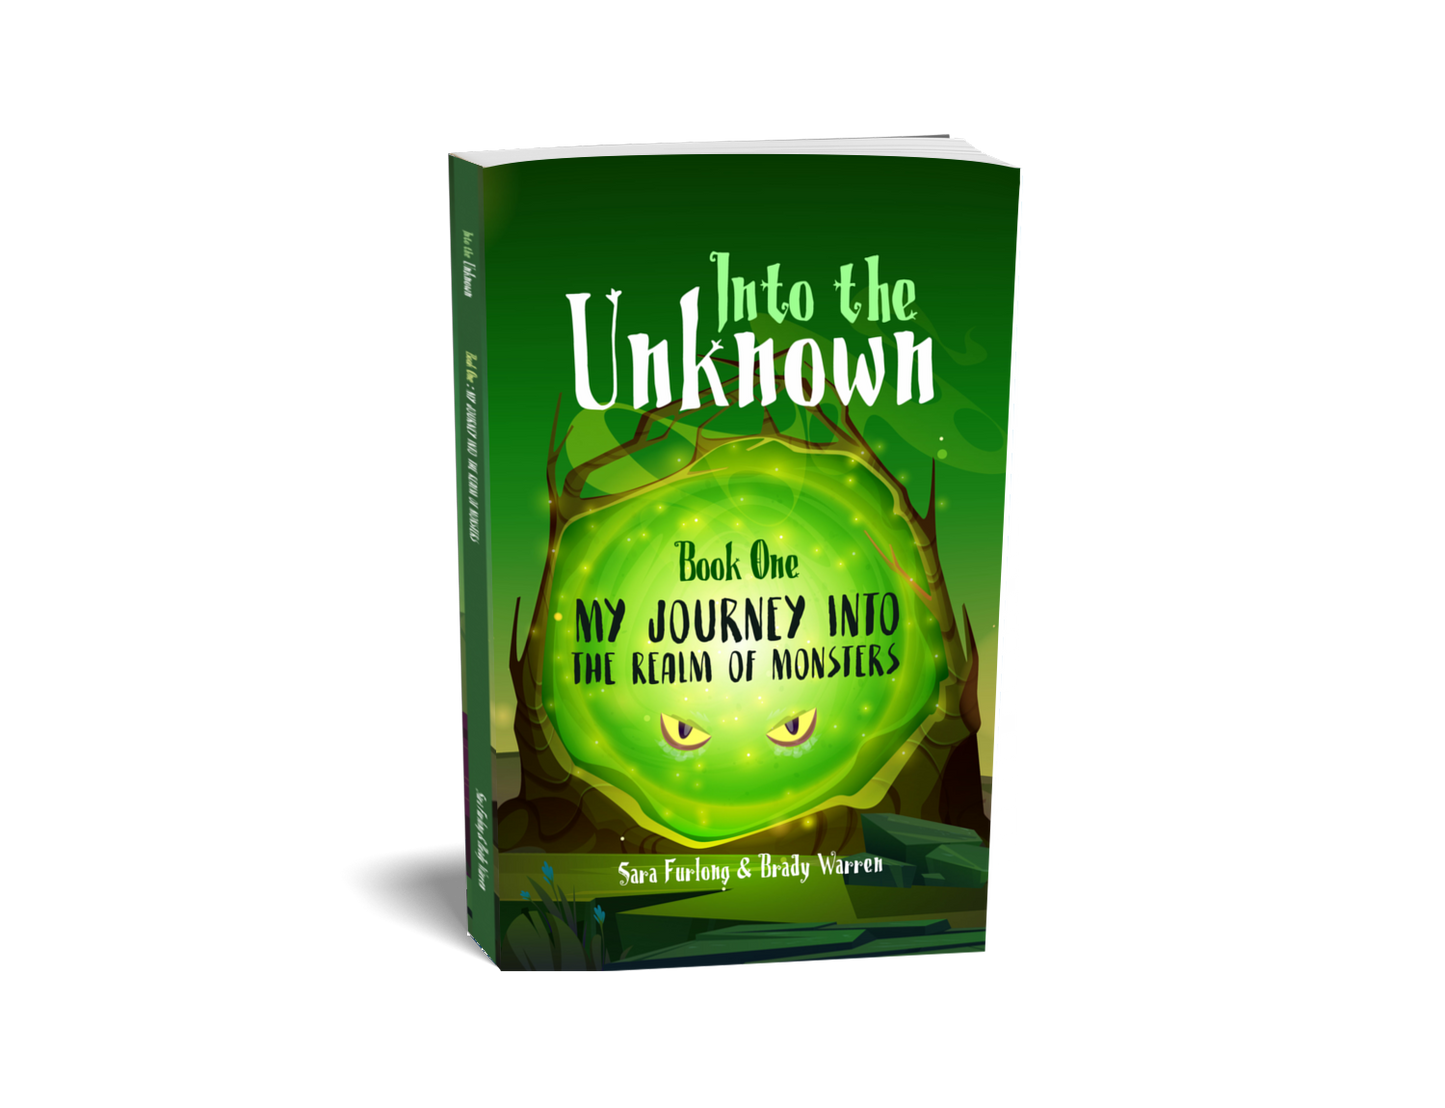 Into The Unknown Book One in: My Journey Into the Realm of Monsters